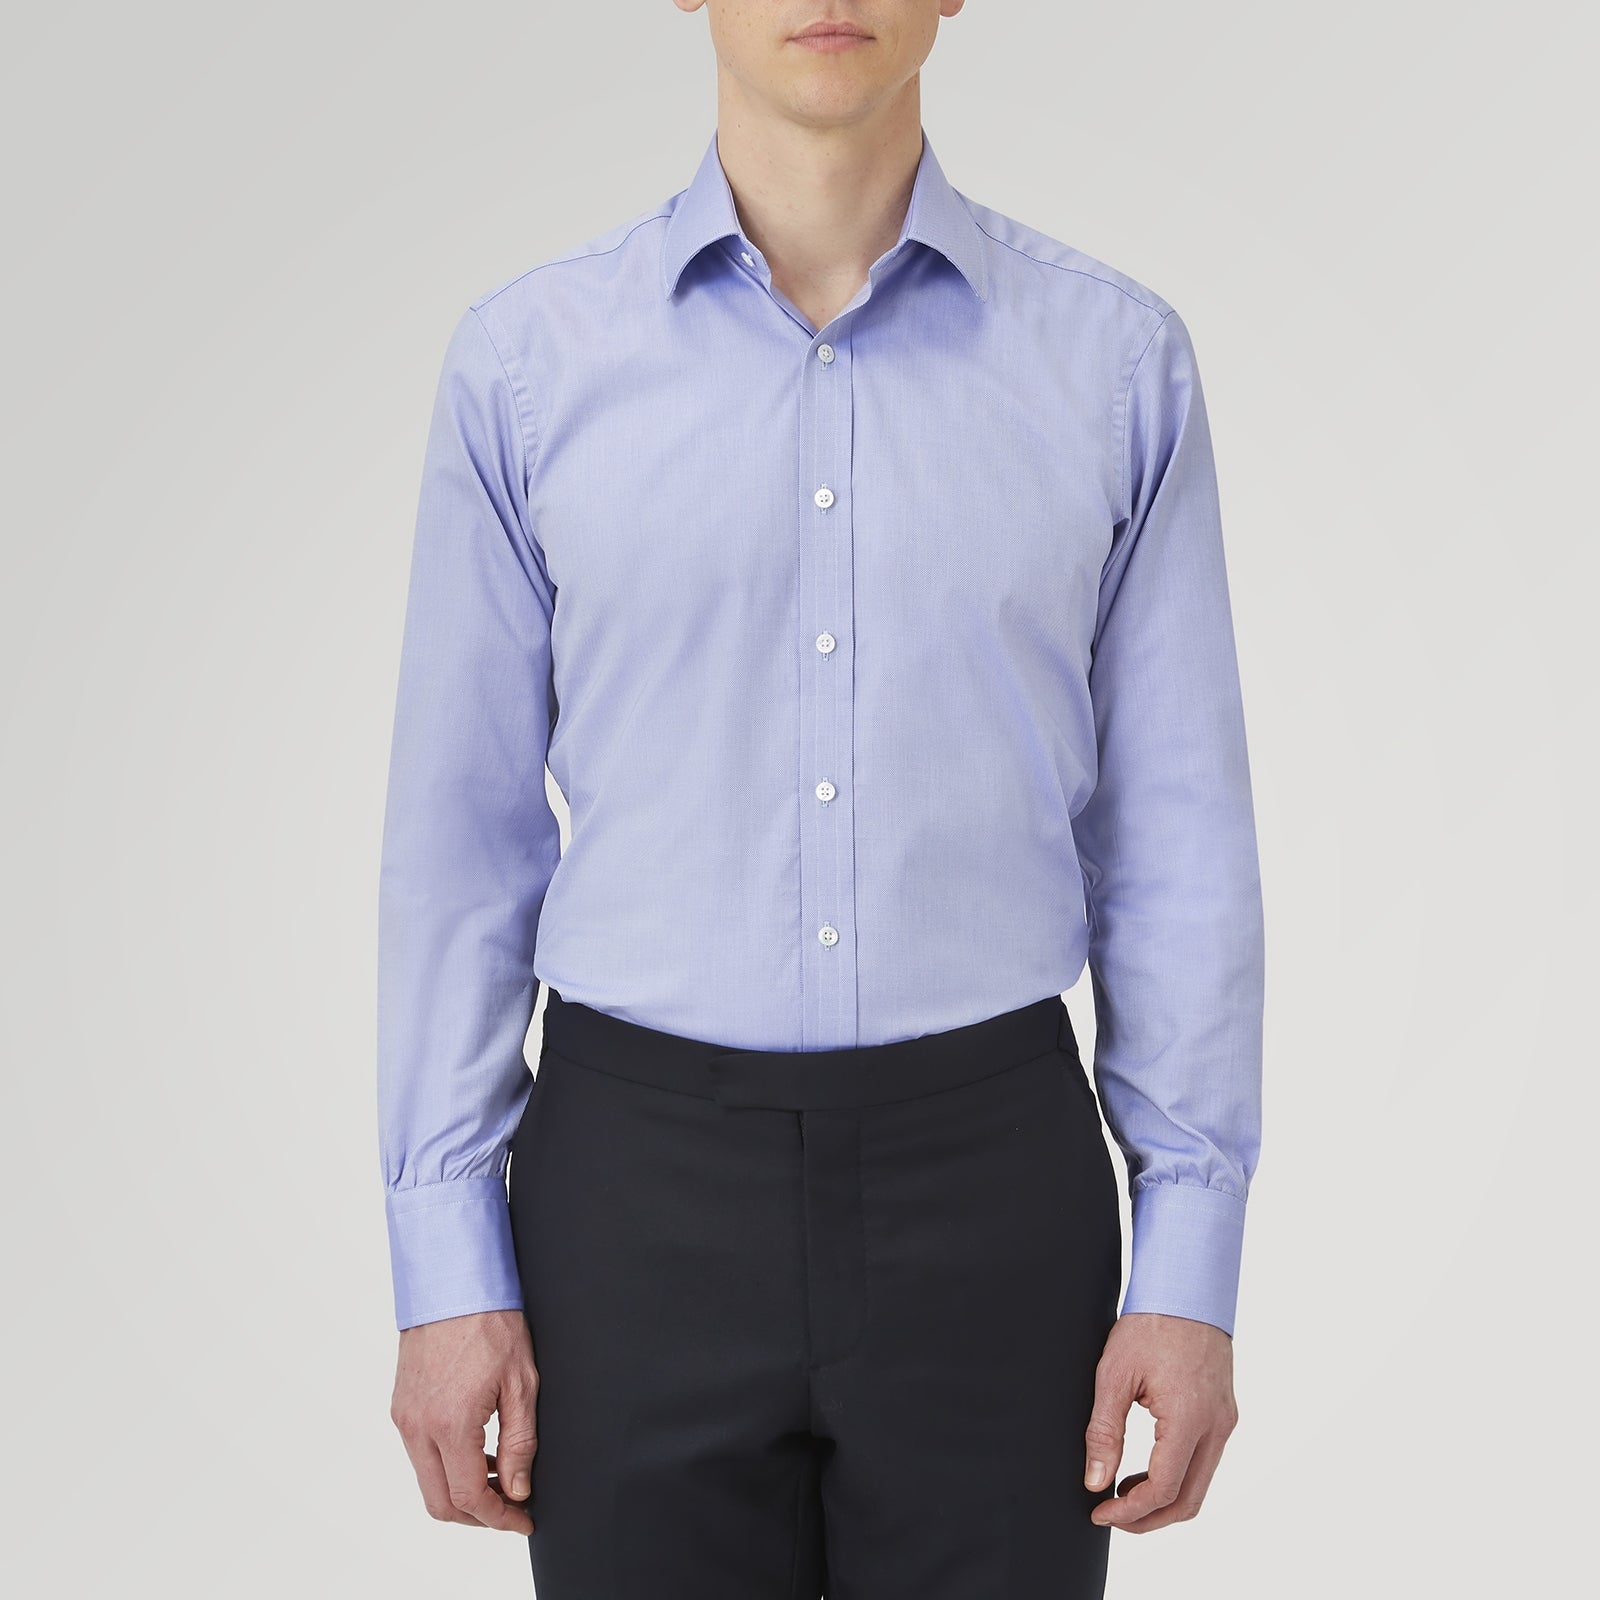 Blue Superfine Oxford Cotton Shirt with T&A Collar and 3-Button Cuffs